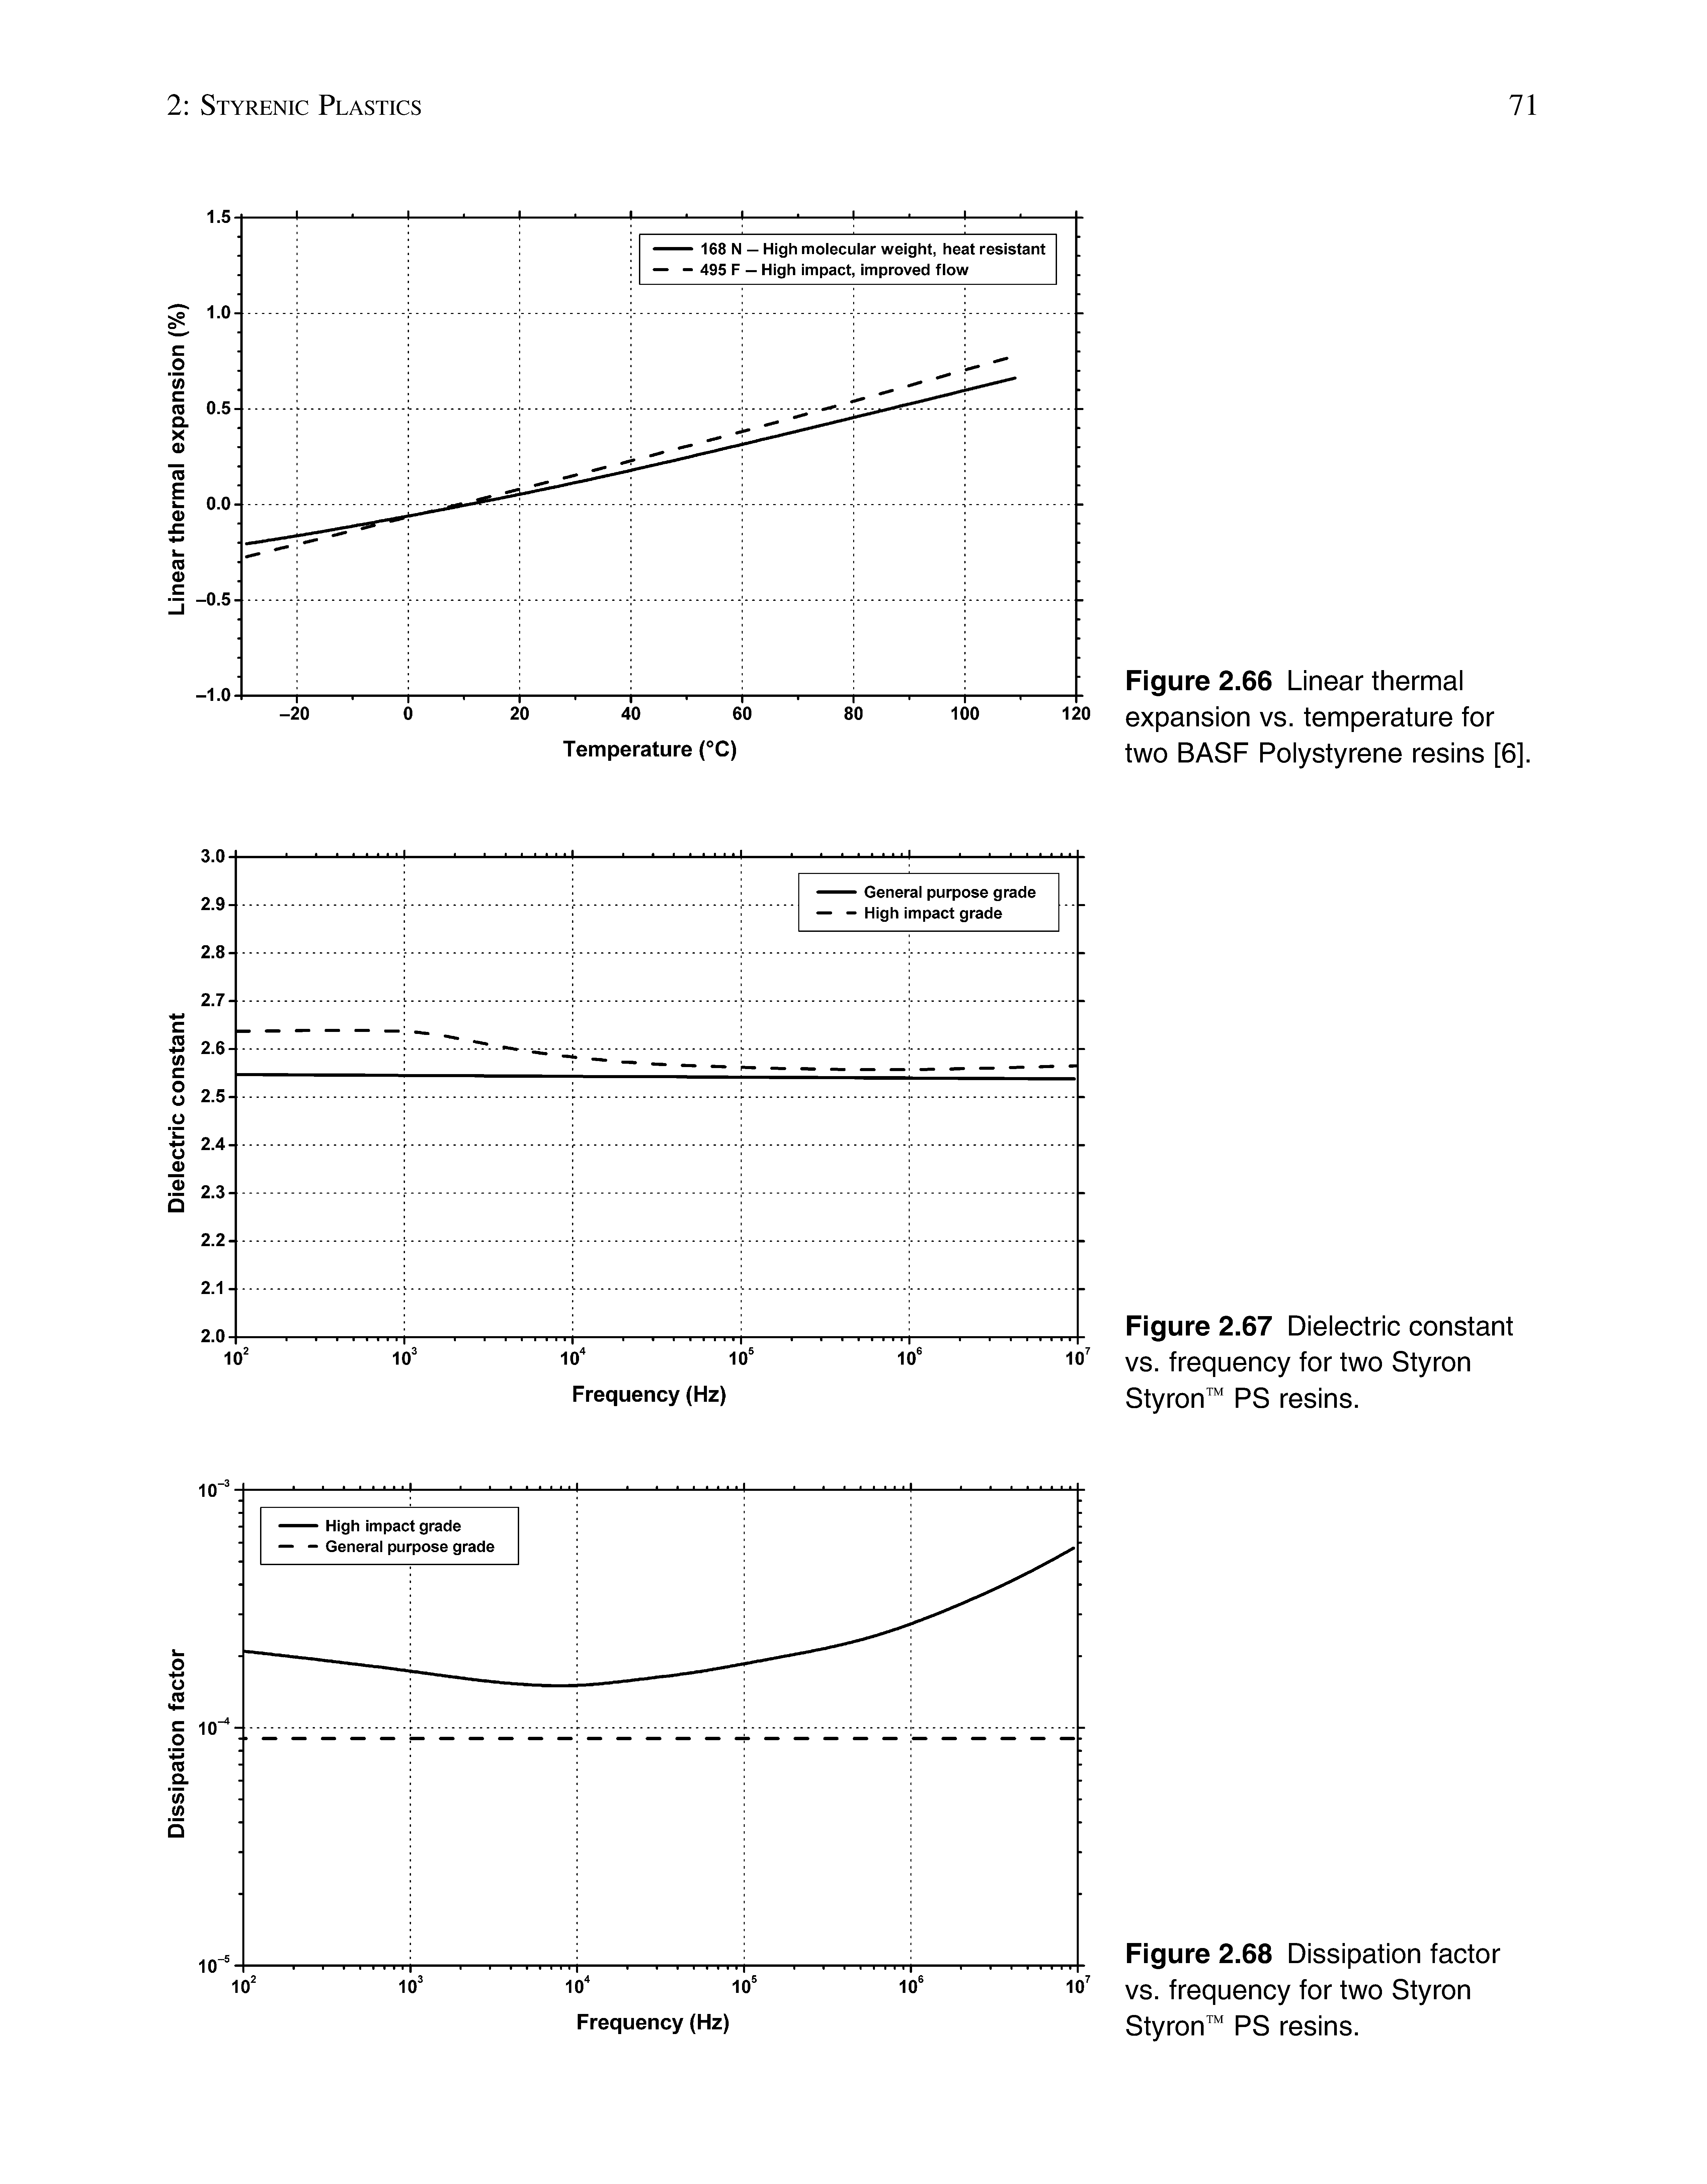 Figure 2.66 Linear thermal expansion vs. temperature for two BASF Polystyrene resins [6].